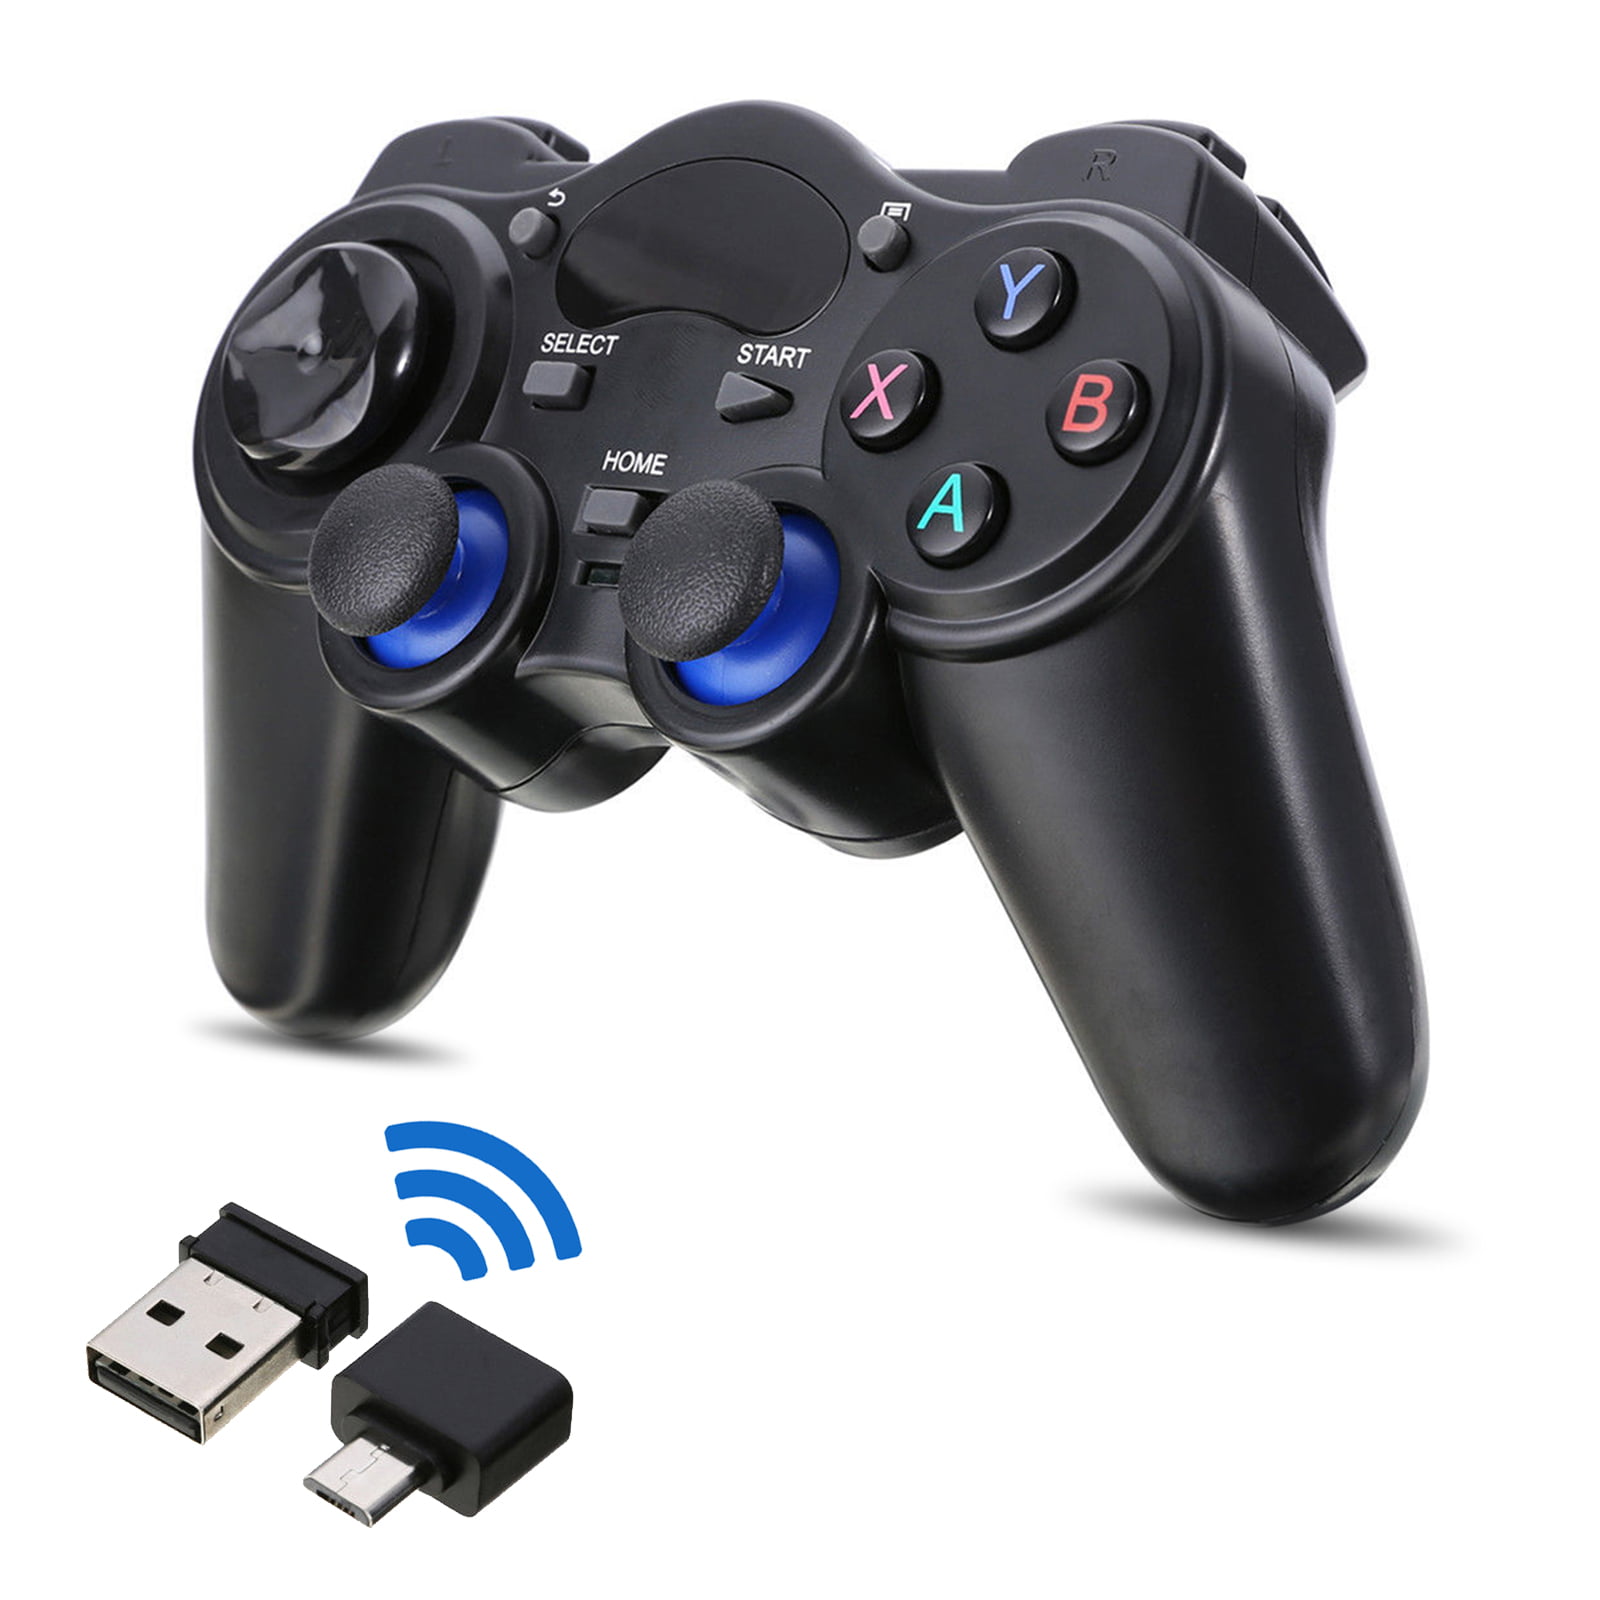 TSV 2.4Ghz Wireless Controller for PS3 / Android / Steam / PC Windows 10/8.1/8/7 - Not Support The Xbox 360 / One, Black, 1-Pack